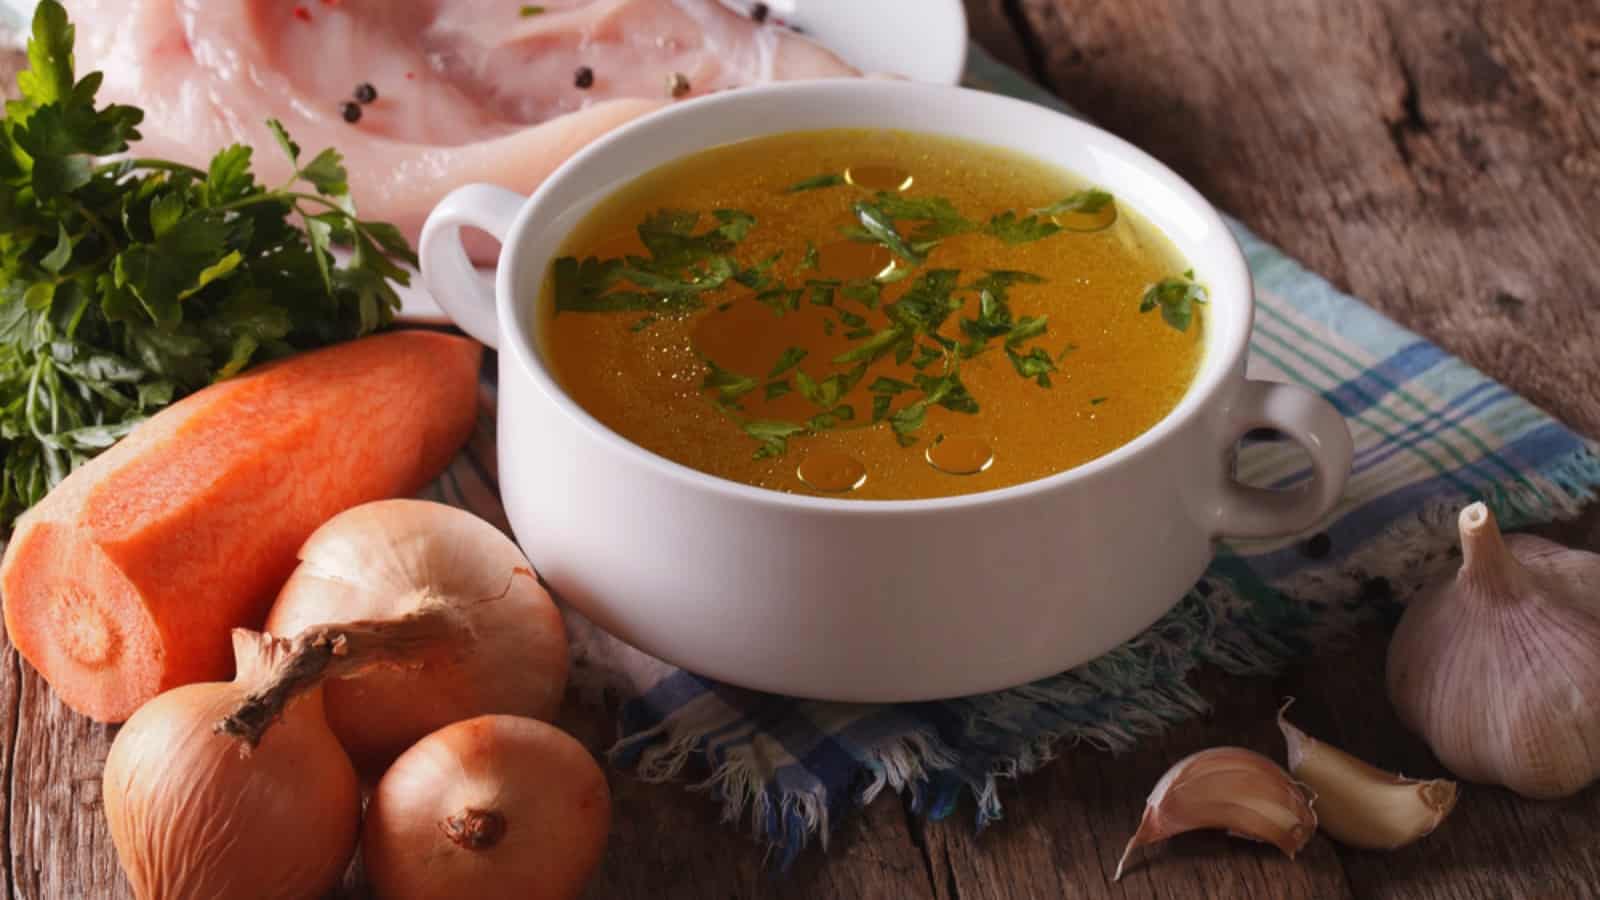 A bowl of soup with carrots, onions and garlic on a wooden table.